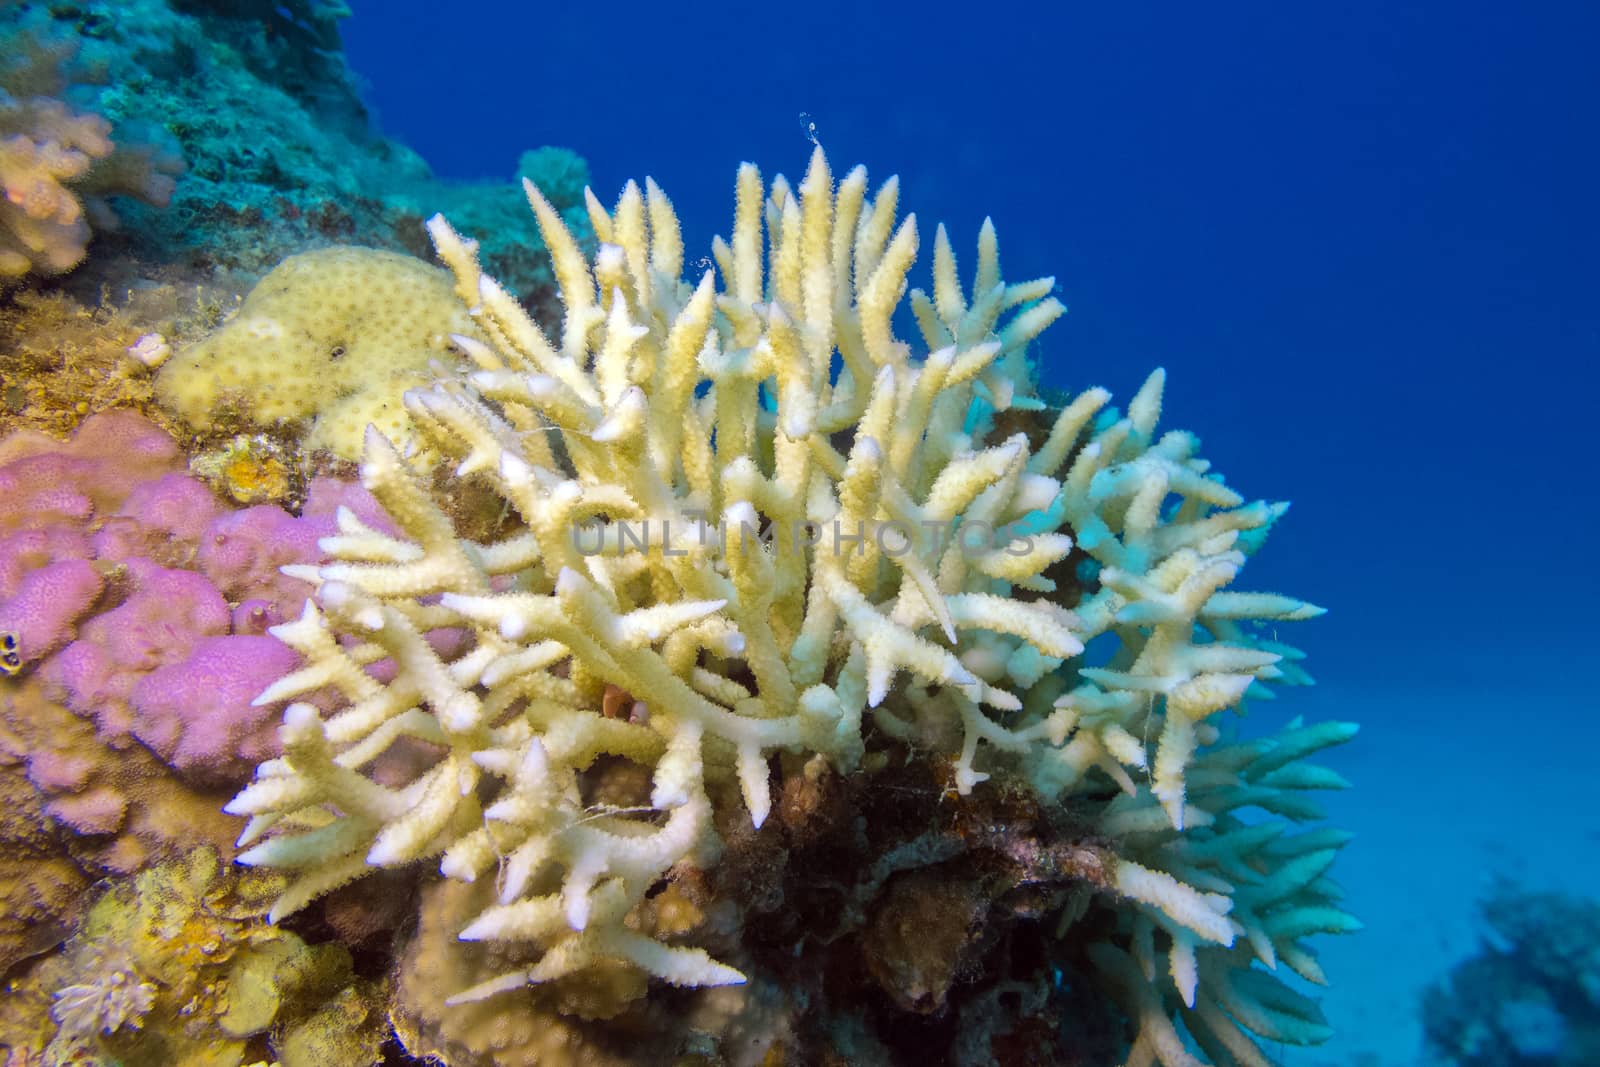 Birdsnest Coral on the coral reef at the bottom of tropical sea, underwater